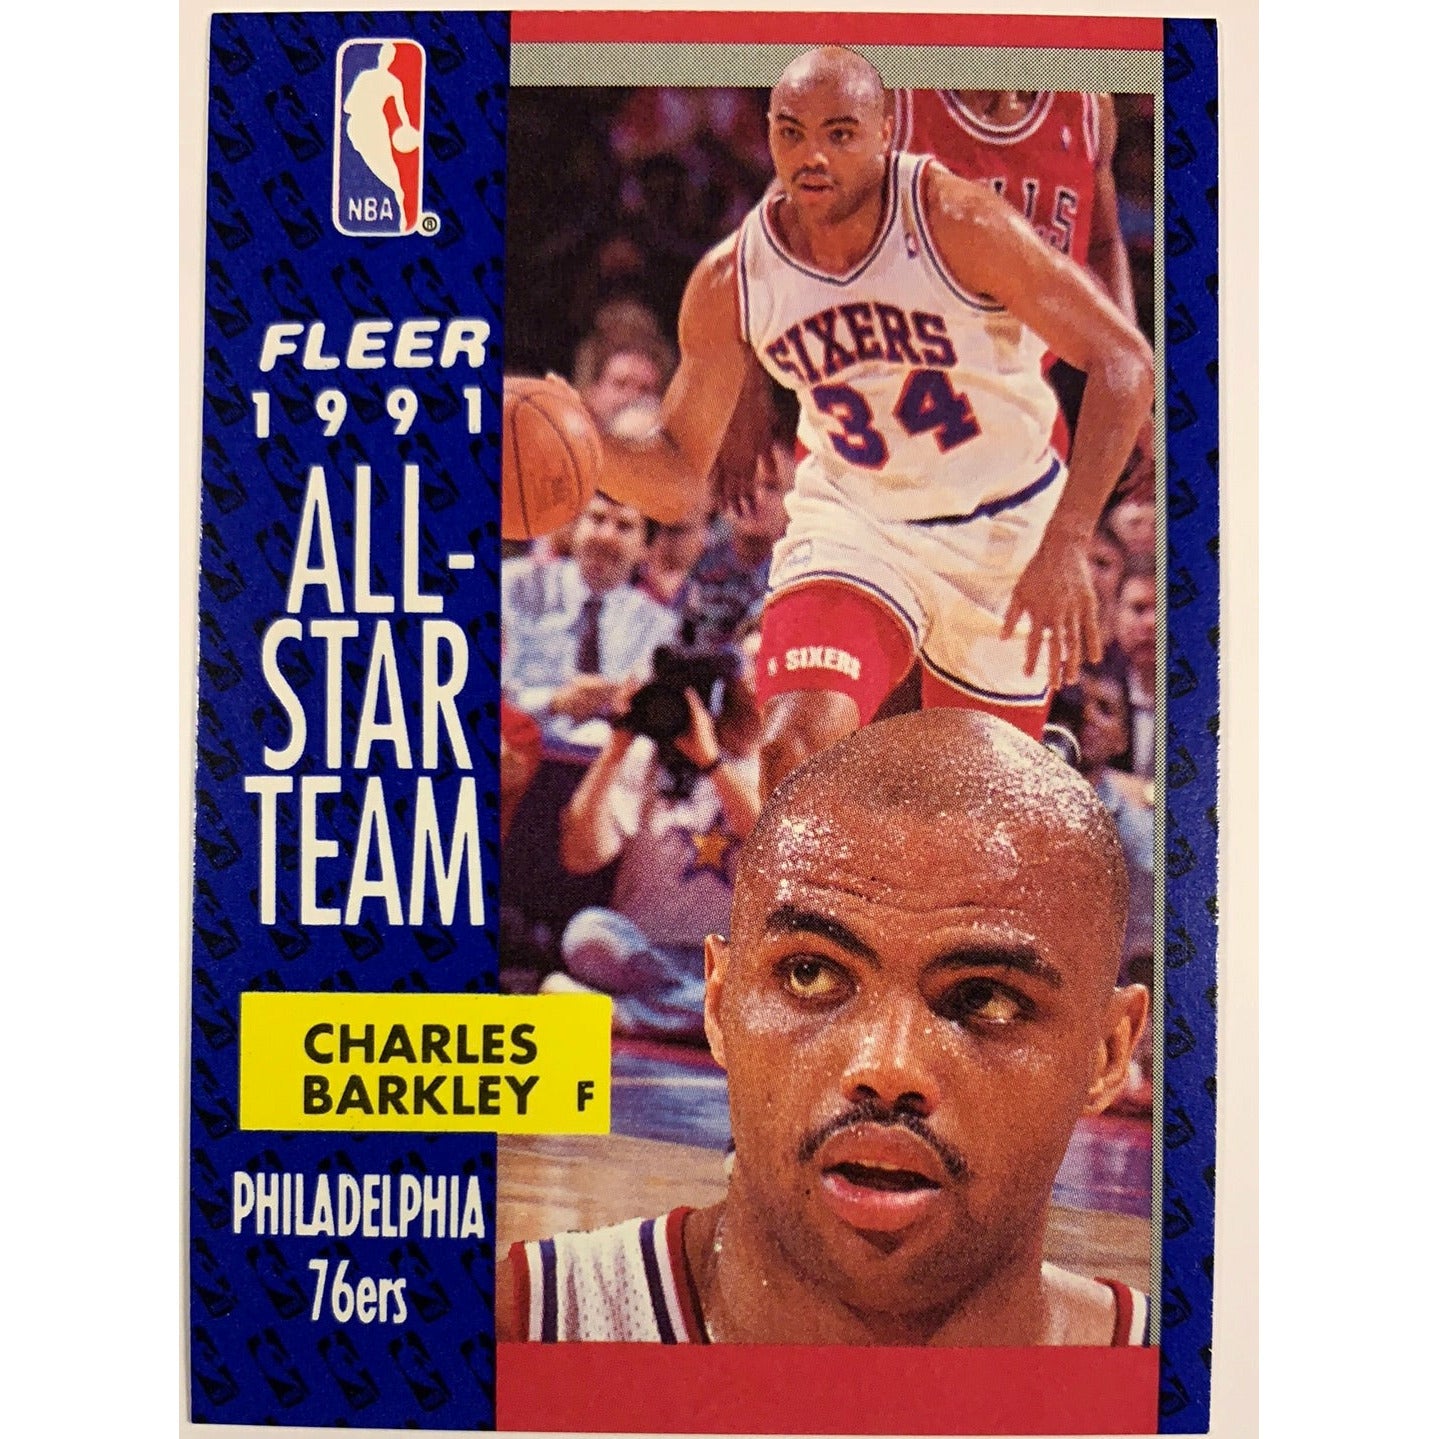  1990-91 Fleer Charles Barkley All Star Team  Local Legends Cards & Collectibles